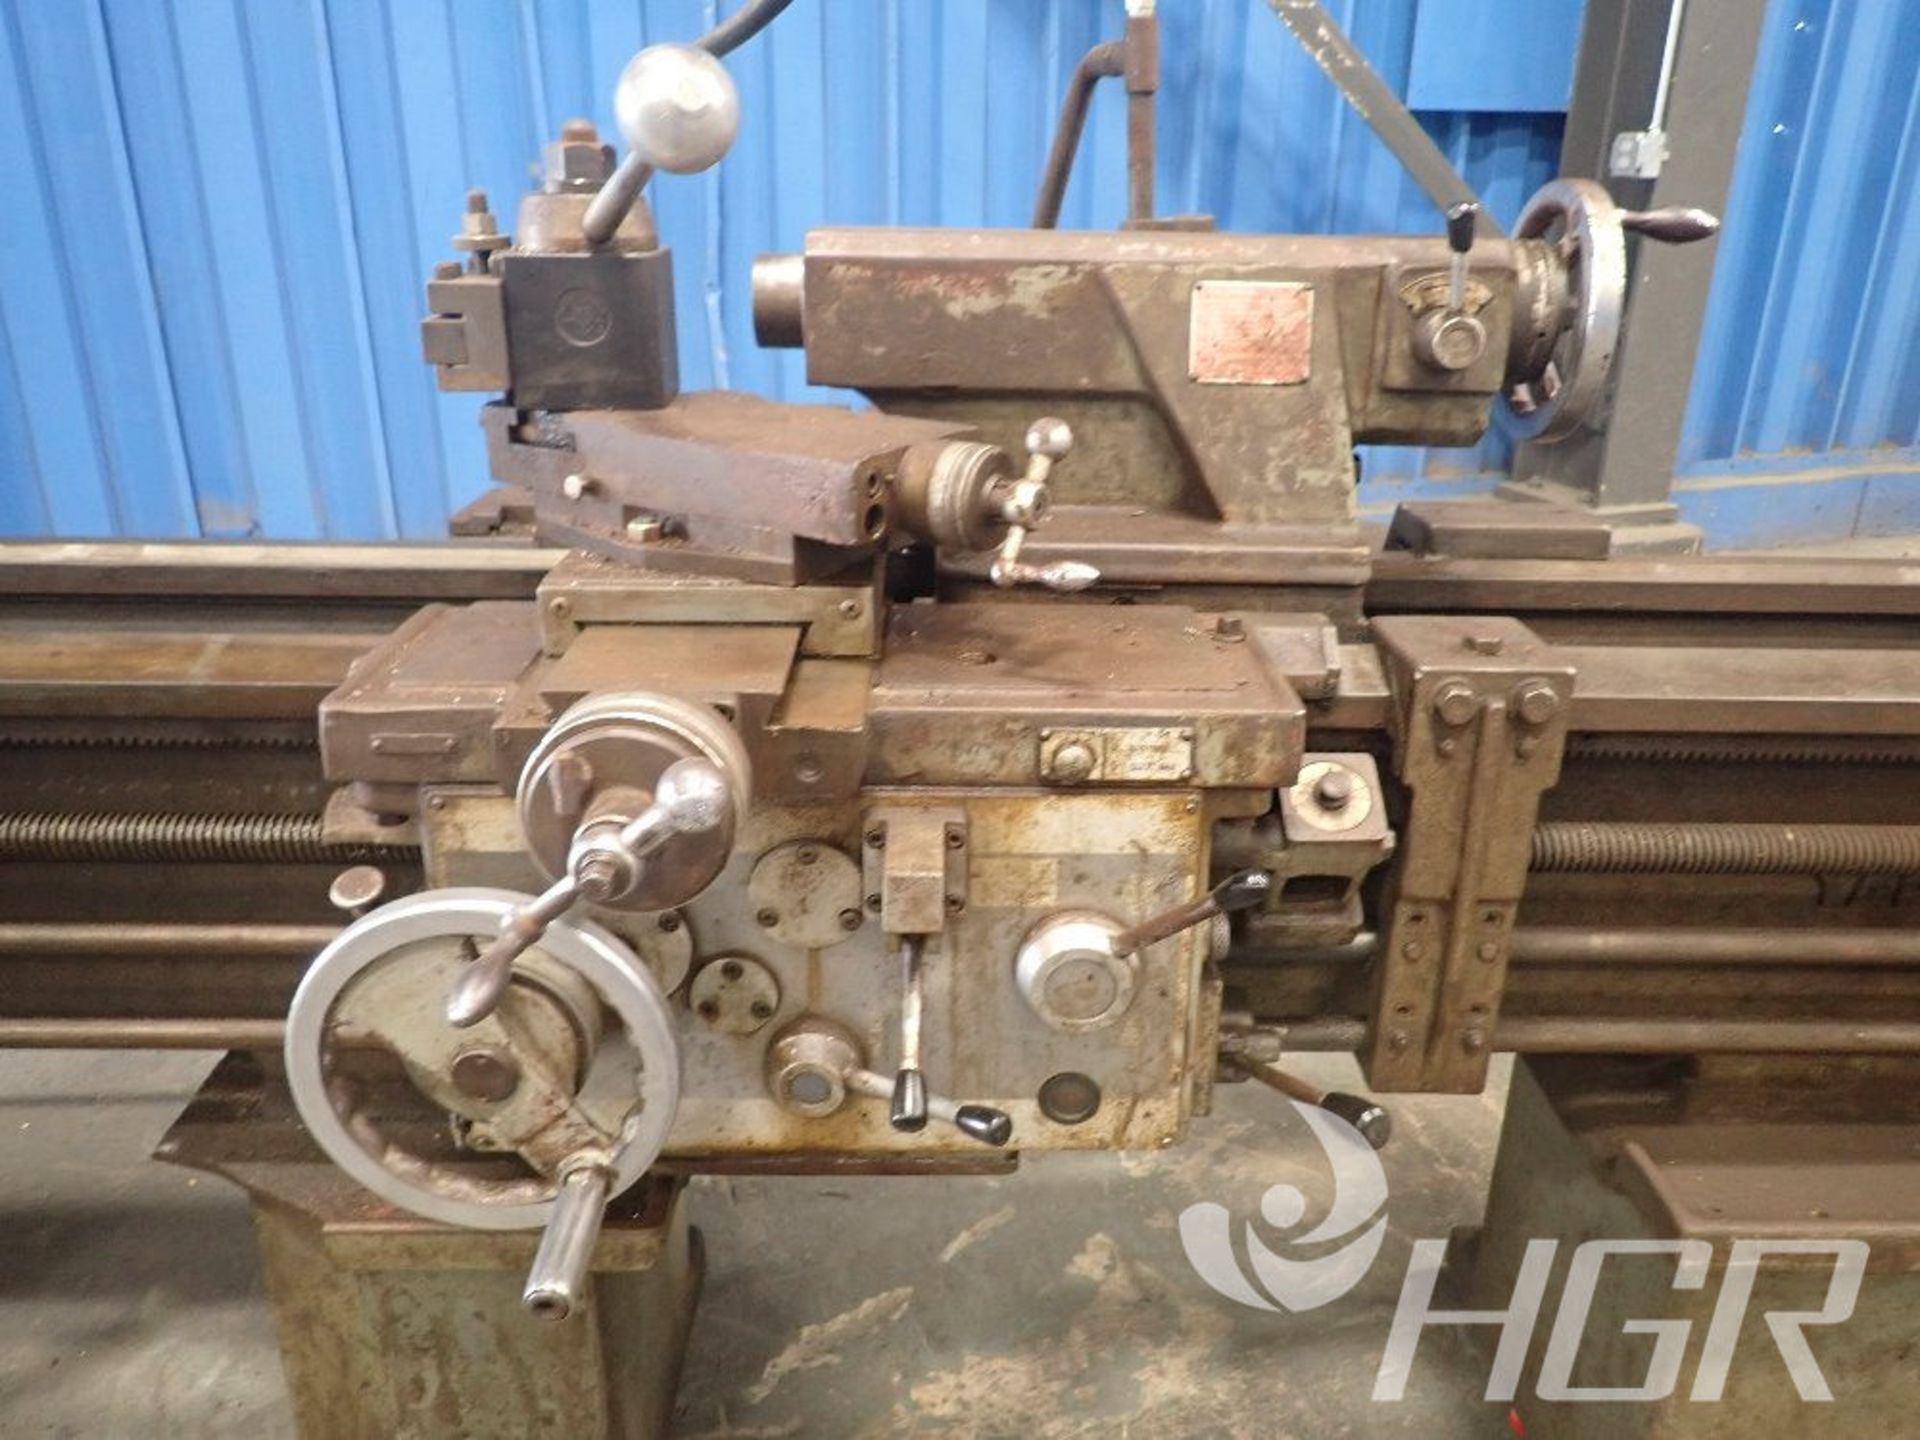 MAZAK GAP BED LATHE, Model n/a, Date: n/a; s/n n/a, Approx. Capacity: 18"X72", Power: n/a, - Image 12 of 17